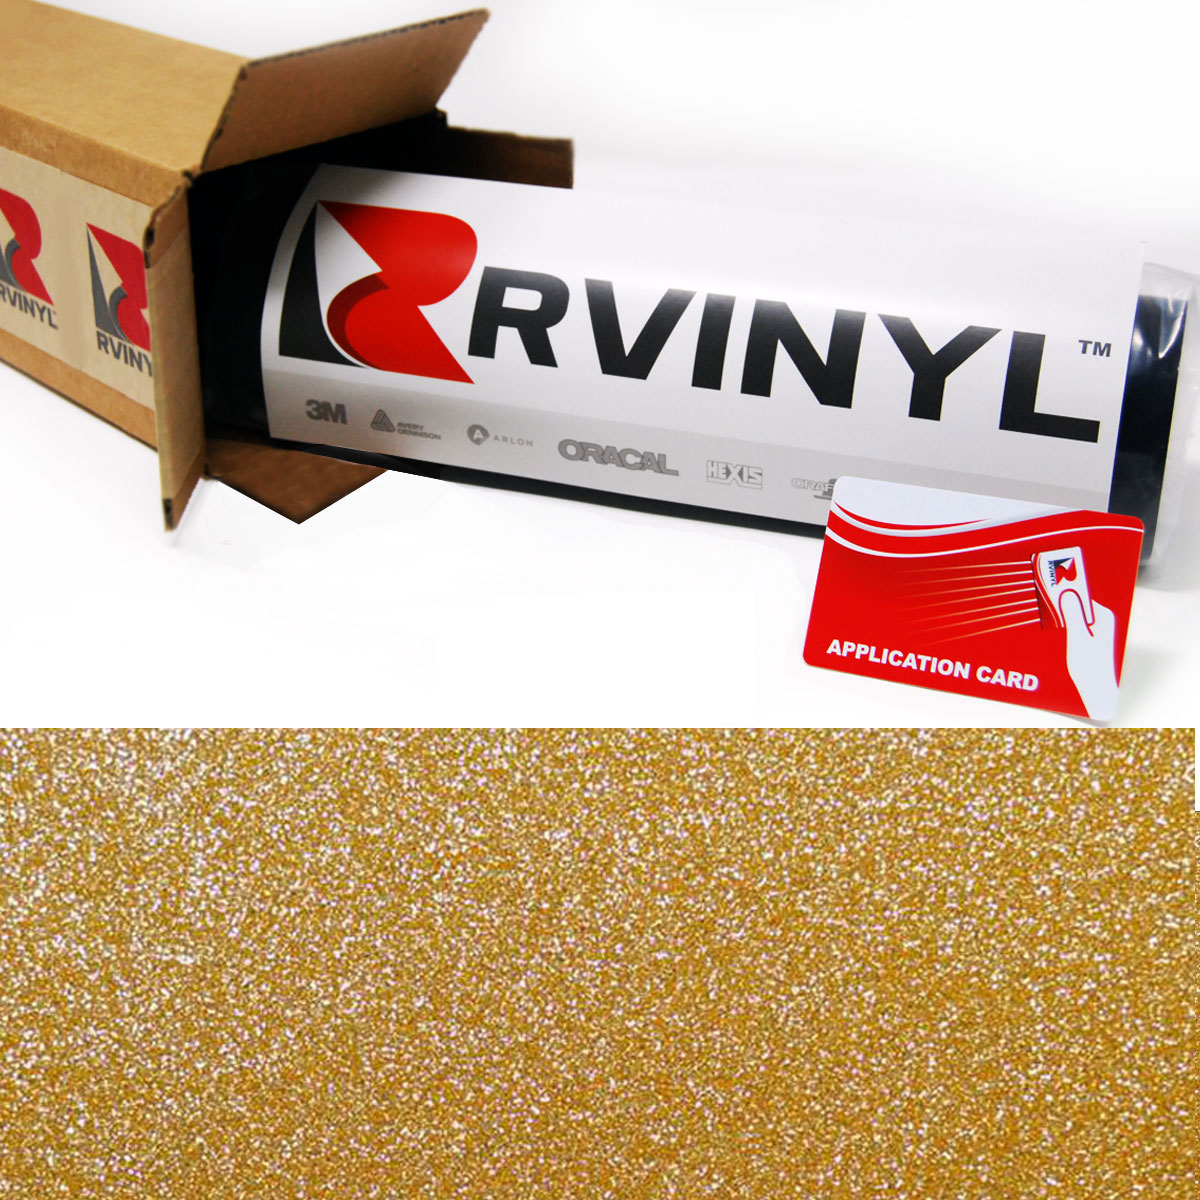 Diamond Amber BD2800001 Total Covering Avery Dennison Supreme Wrapping Film 